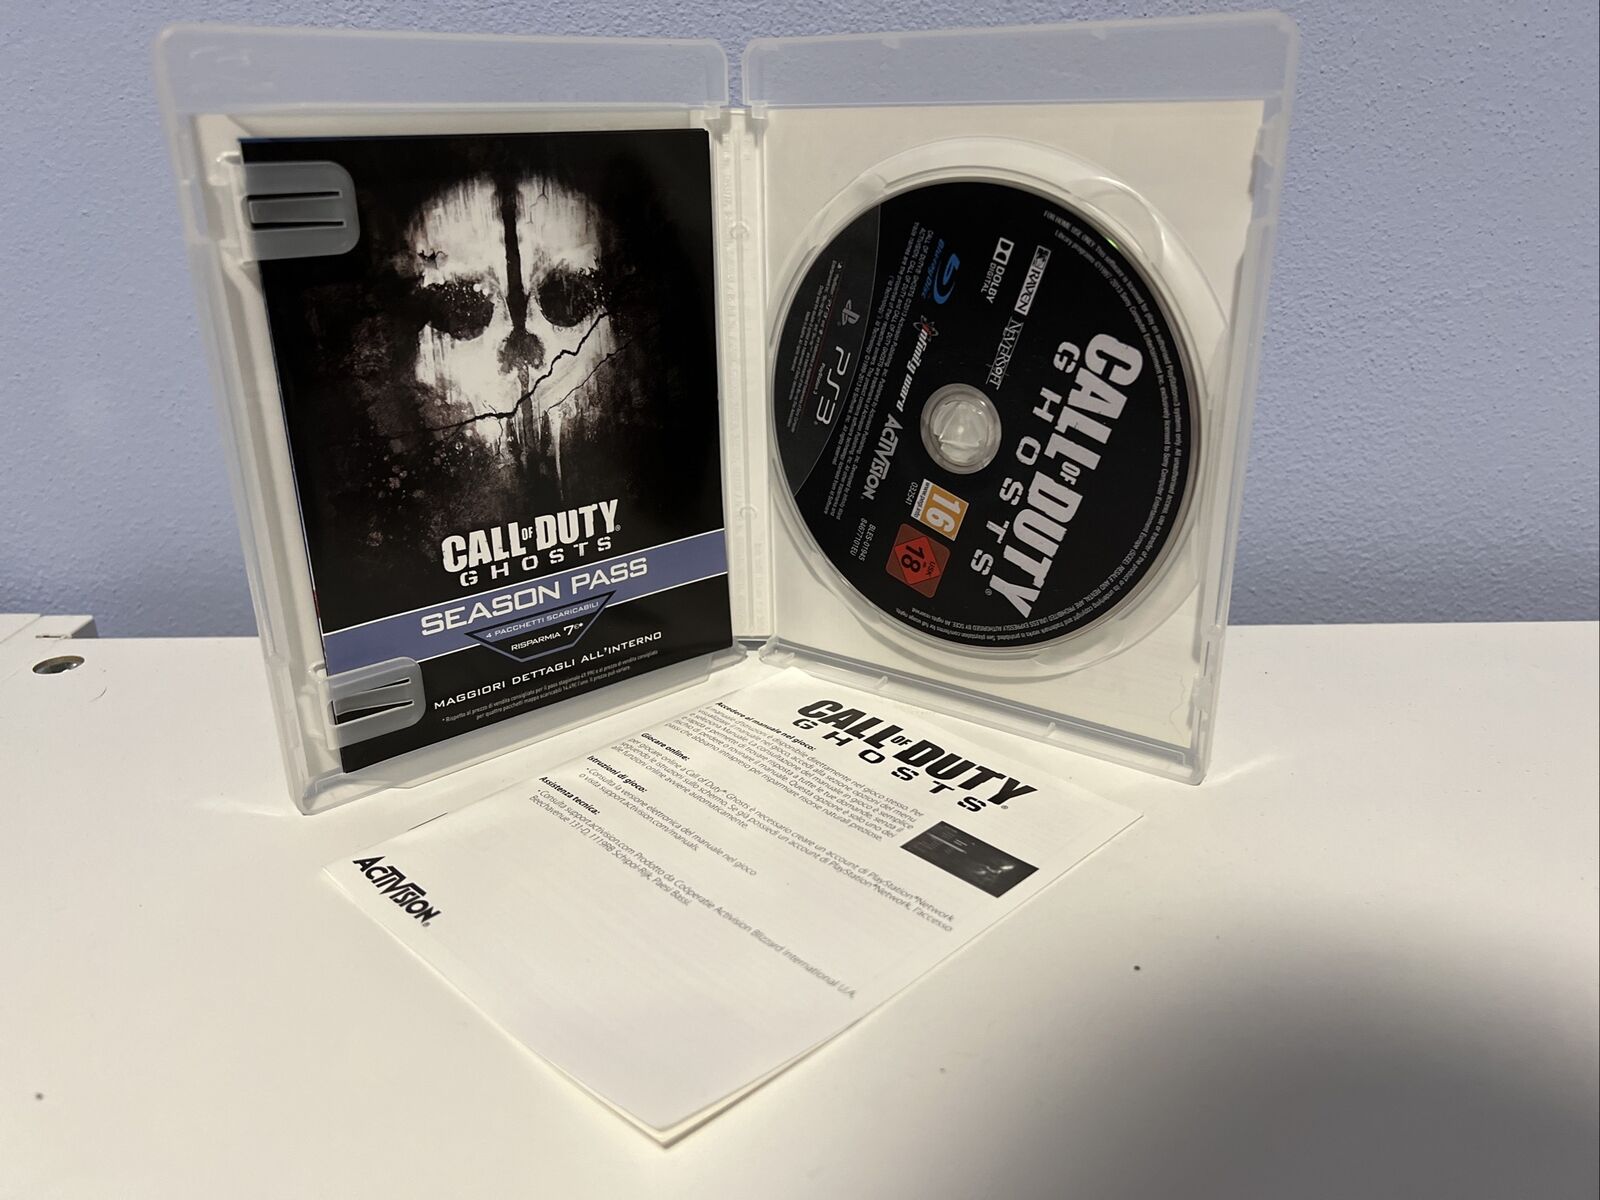 Ps3-videogame-Call-Of-Duty-Ghost-Pal-Ita-144289430822-4